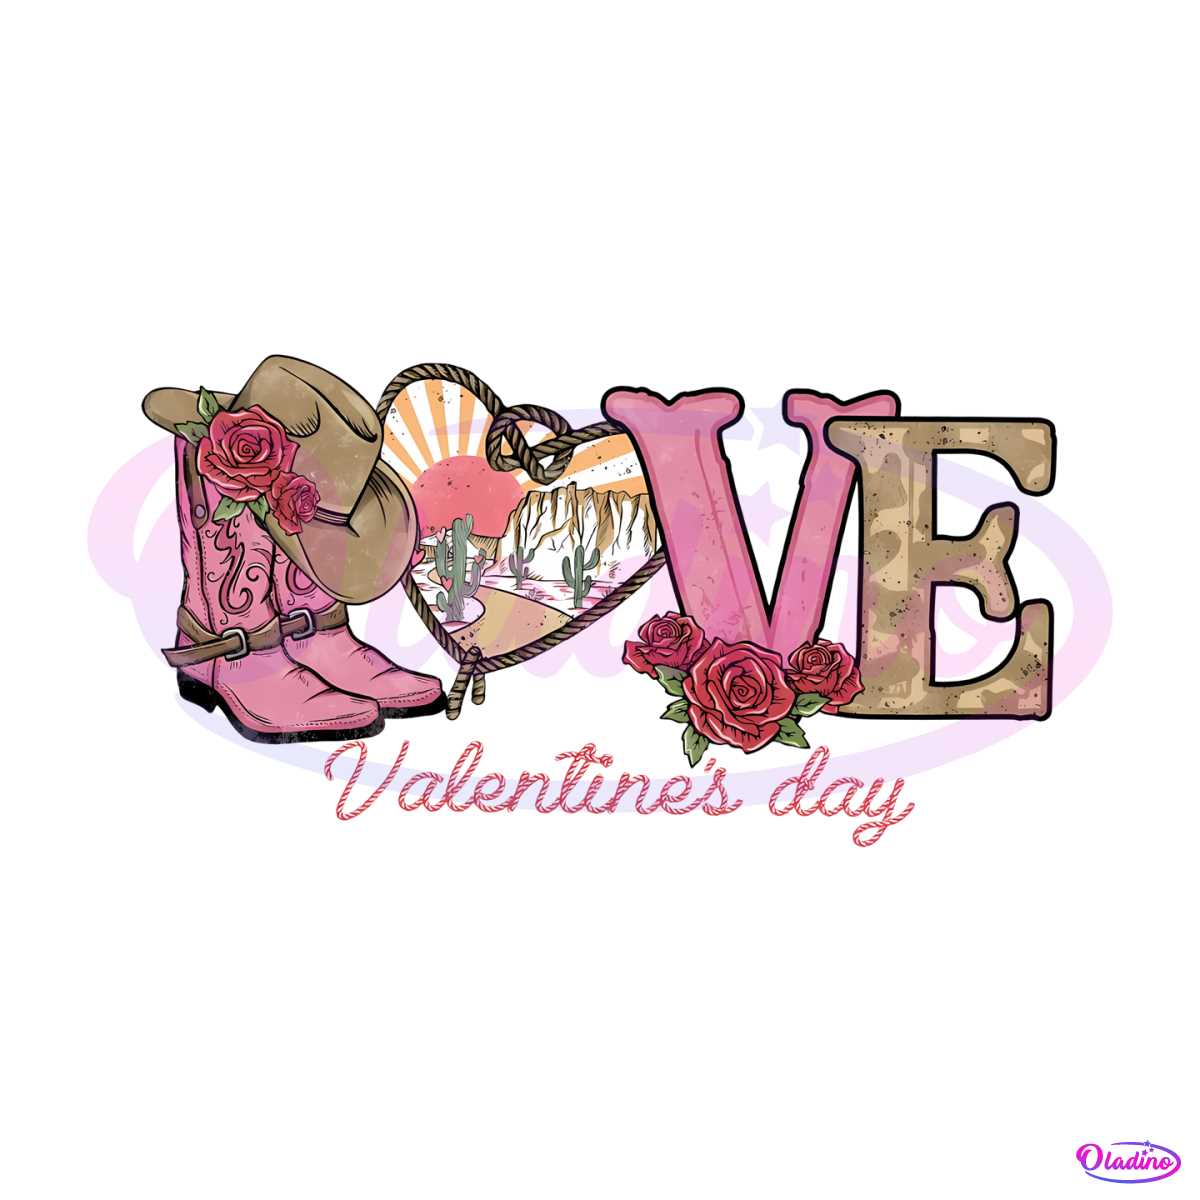 western-love-valentines-day-png